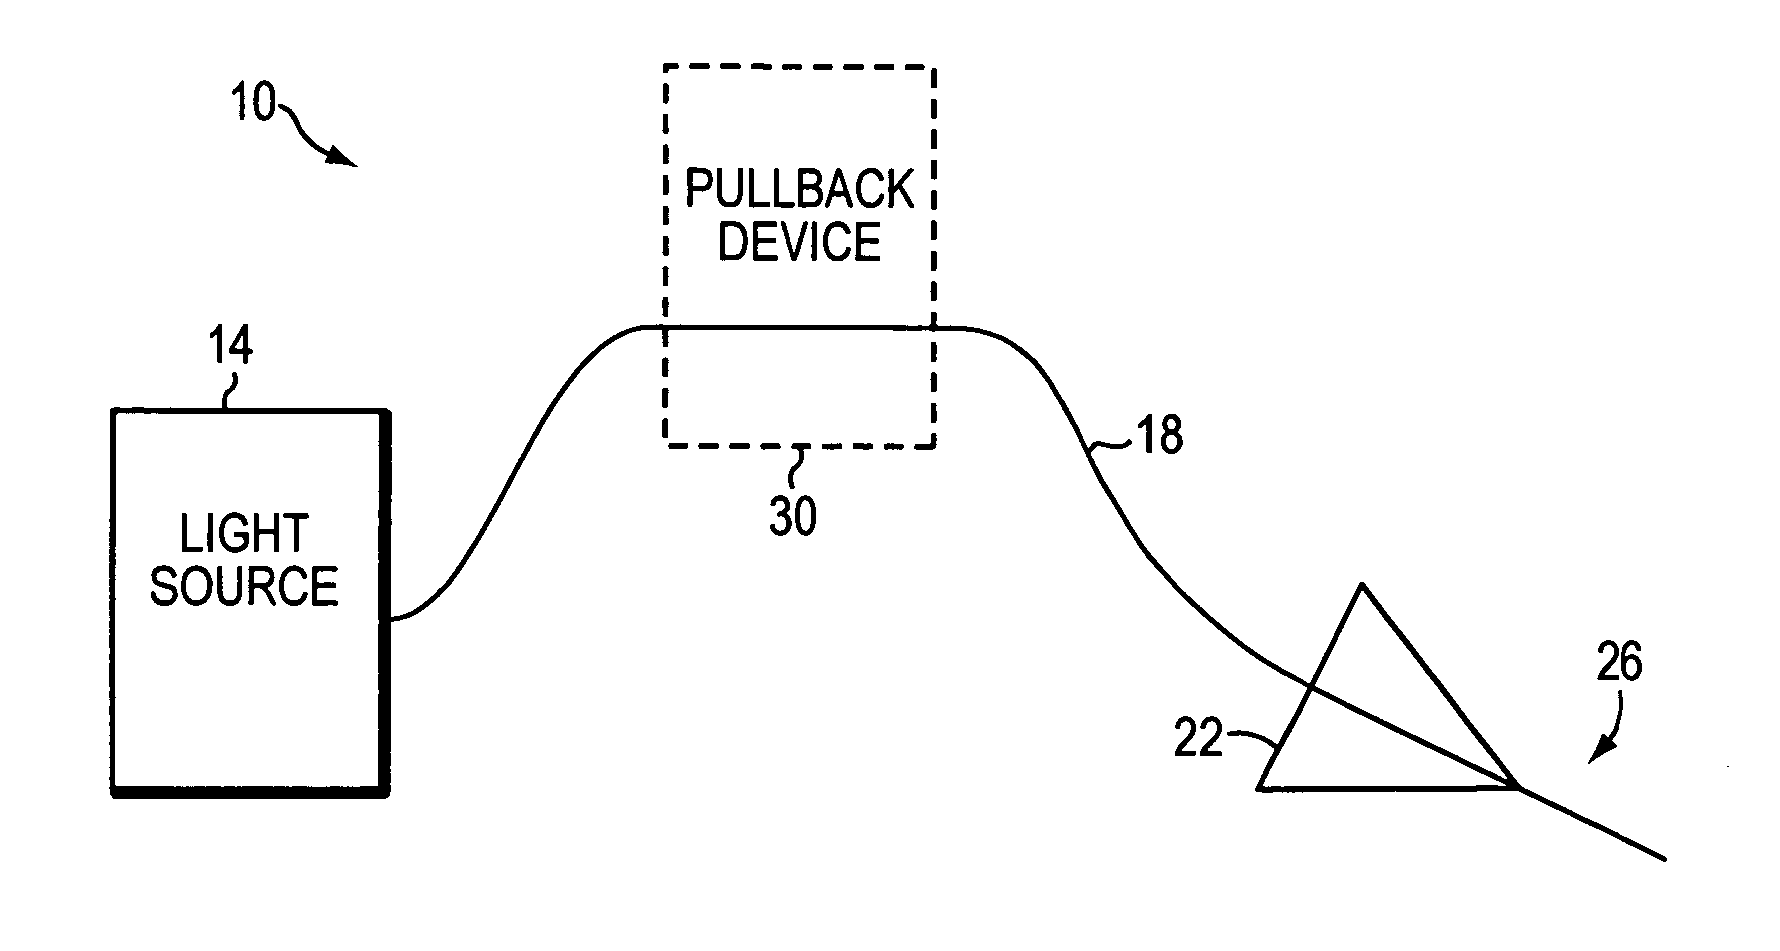 Endovascular treatment of a blood vessel using a light source